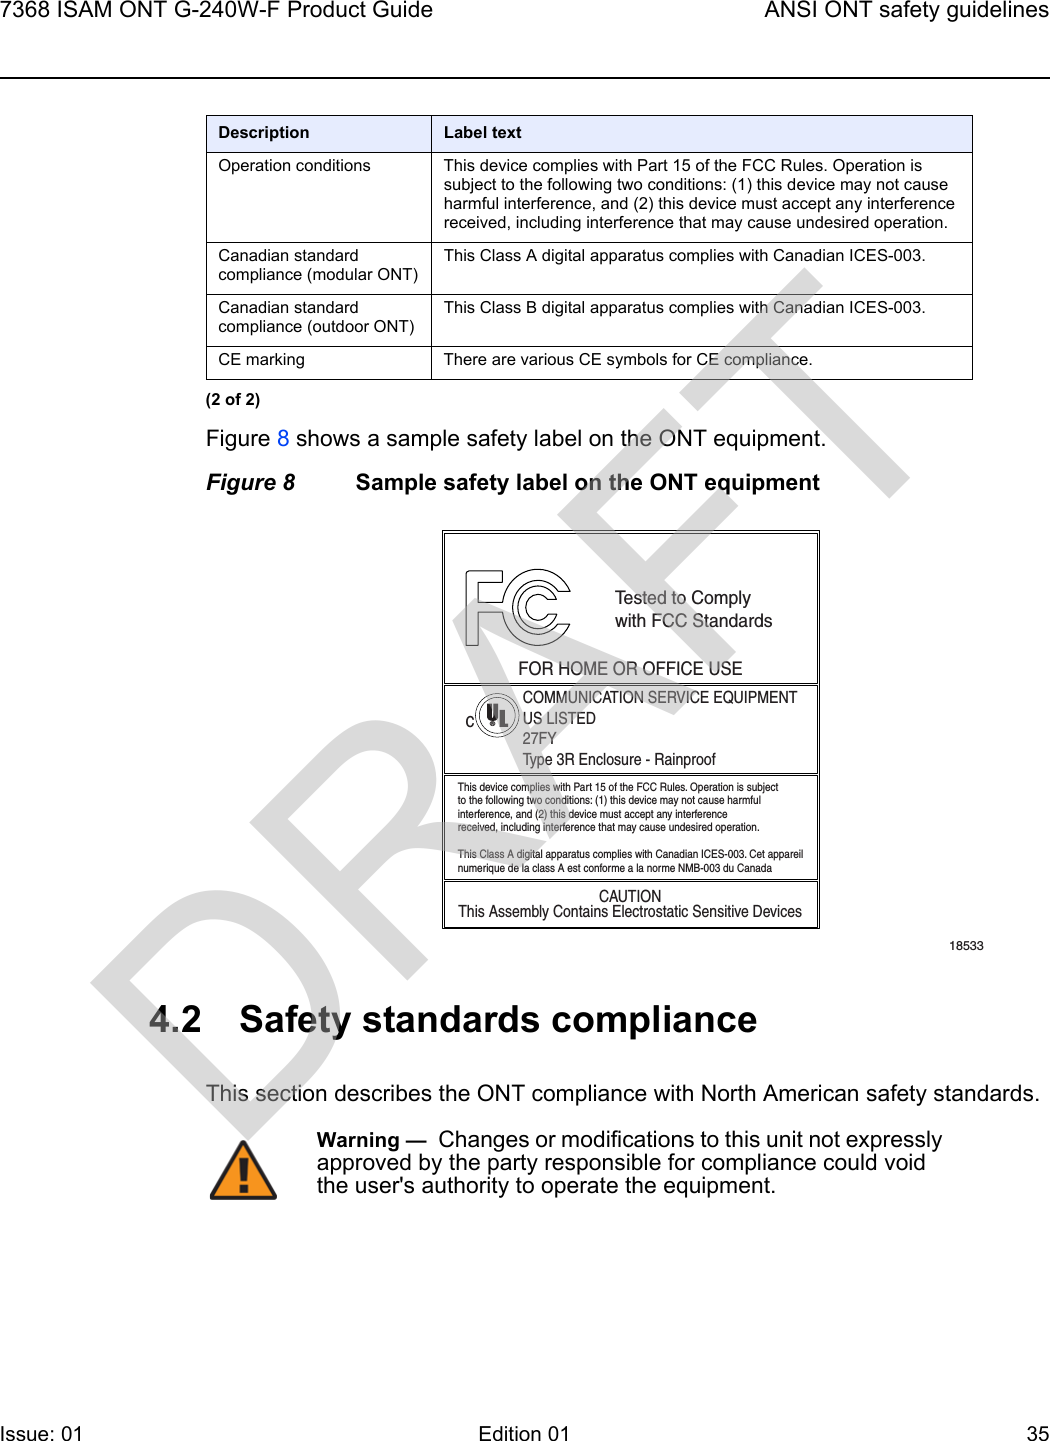 7368 ISAM ONT G-240W-F Product Guide ANSI ONT safety guidelinesIssue: 01 Edition 01 35 Figure 8 shows a sample safety label on the ONT equipment.Figure 8 Sample safety label on the ONT equipment4.2 Safety standards complianceThis section describes the ONT compliance with North American safety standards.Operation conditions This device complies with Part 15 of the FCC Rules. Operation is subject to the following two conditions: (1) this device may not cause harmful interference, and (2) this device must accept any interference received, including interference that may cause undesired operation.Canadian standard compliance (modular ONT)This Class A digital apparatus complies with Canadian ICES-003. Canadian standard compliance (outdoor ONT)This Class B digital apparatus complies with Canadian ICES-003. CE marking There are various CE symbols for CE compliance.Description Label text(2 of 2)18533This device complies with Part 15 of the FCC Rules. Operation is subjectto the following two conditions: (1) this device may not cause harmfulinterference, and (2) this device must accept any interferencereceived, including interference that may cause undesired operation.This Class A digital apparatus complies with Canadian ICES-003. Cet appareilnumerique de la class A est conforme a la norme NMB-003 du CanadaTested to Complywith FCC StandardsFOR HOME OR OFFICE USECOMMUNICATION SERVICE EQUIPMENTUS LISTED27FYType 3R Enclosure - RainproofCAUTIONThis Assembly Contains Electrostatic Sensitive Devicesc®Warning —  Changes or modifications to this unit not expressly approved by the party responsible for compliance could void the user&apos;s authority to operate the equipment.DRAFT